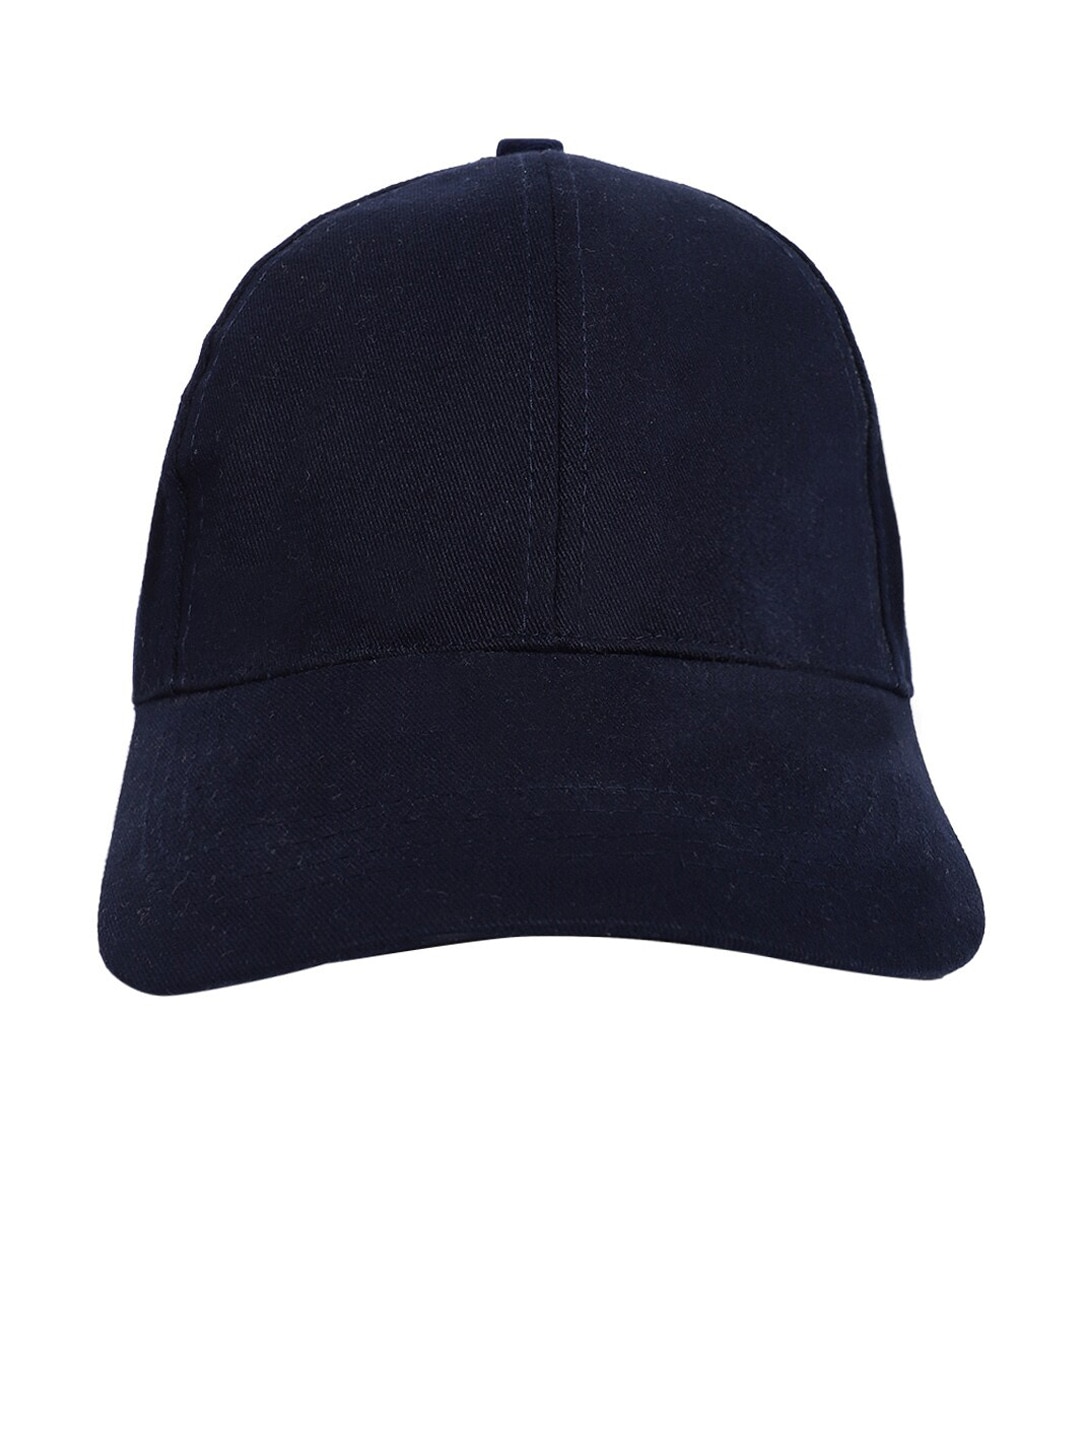 QUIRKY Unisex Navy Blue Cotton Baseball Cap Price in India